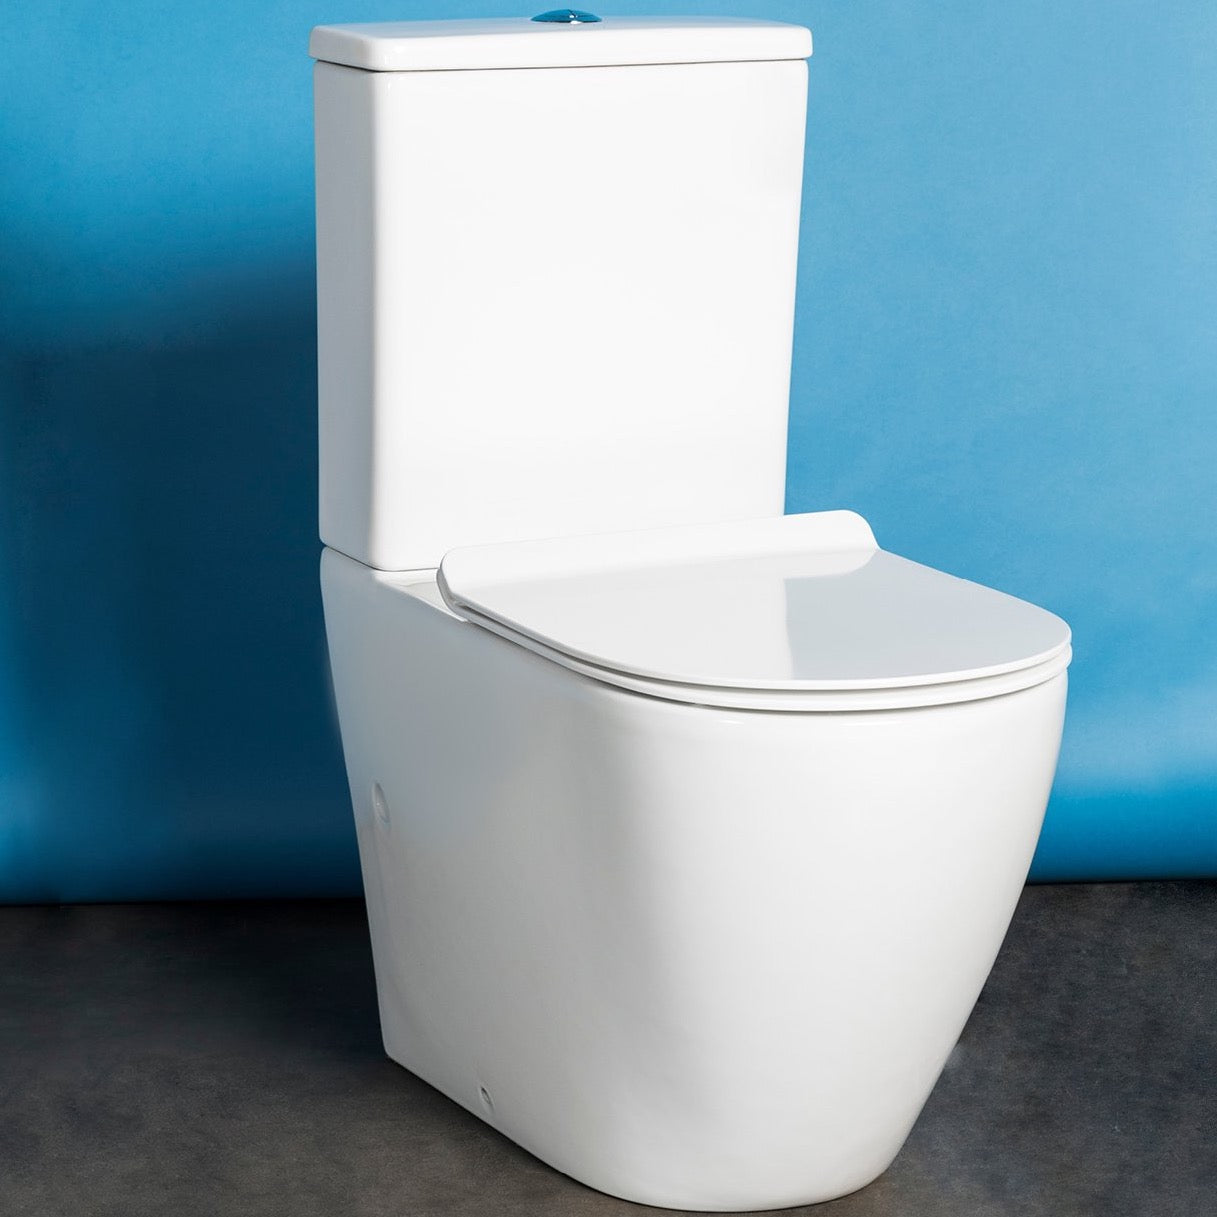 The Hillier Rimless Wall-Faced Two-Piece Toilet